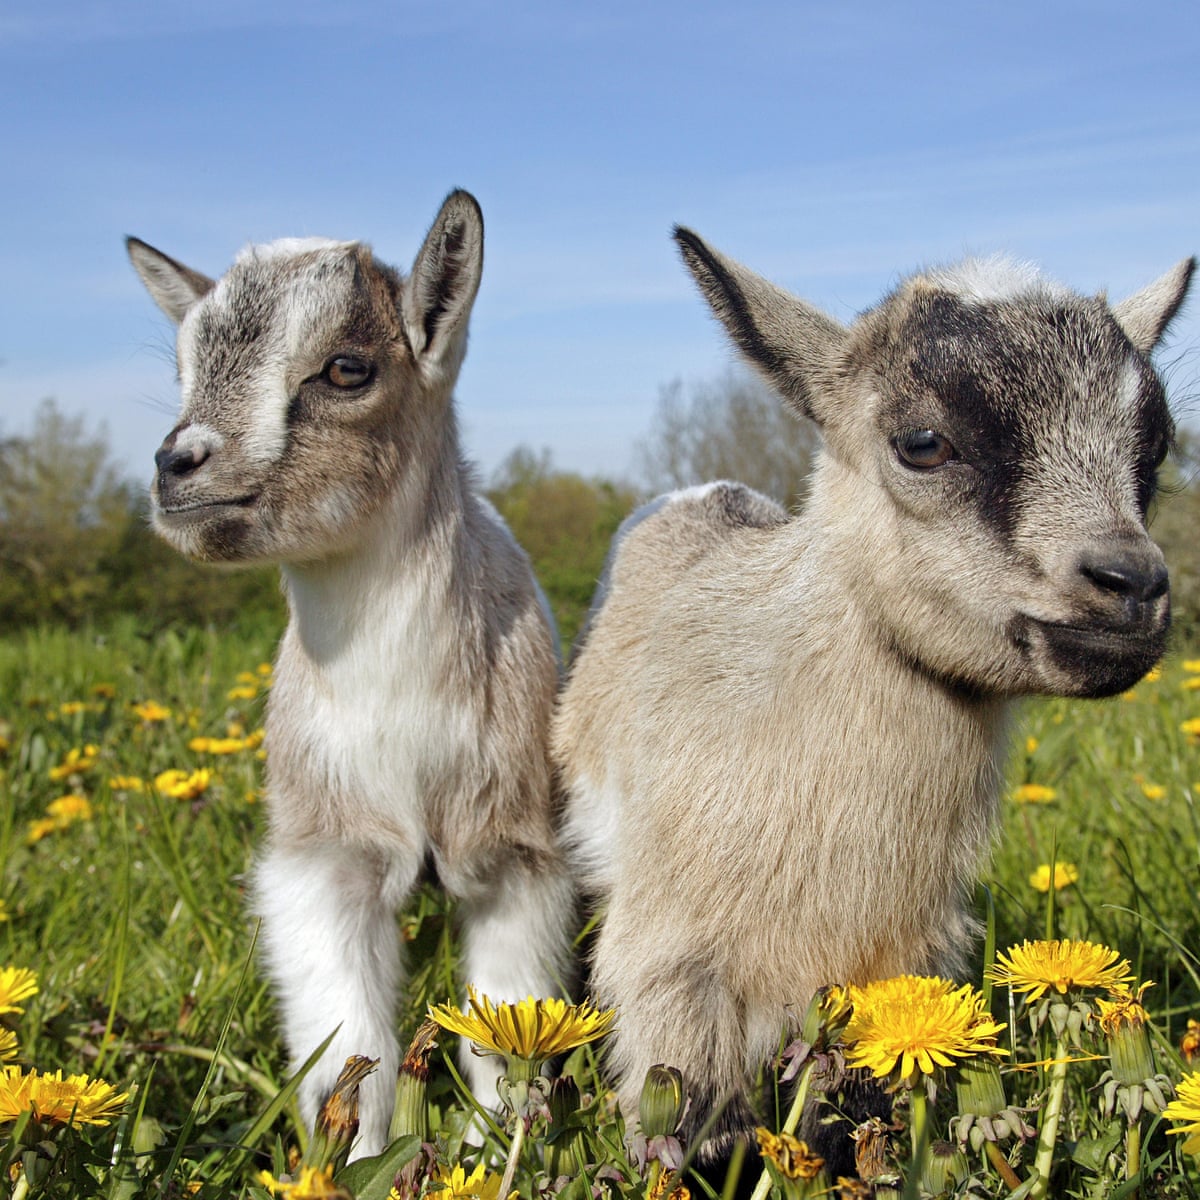 A 'murder' mystery with a toxic twist ... and pygmy goats | Forensic  science | The Guardian